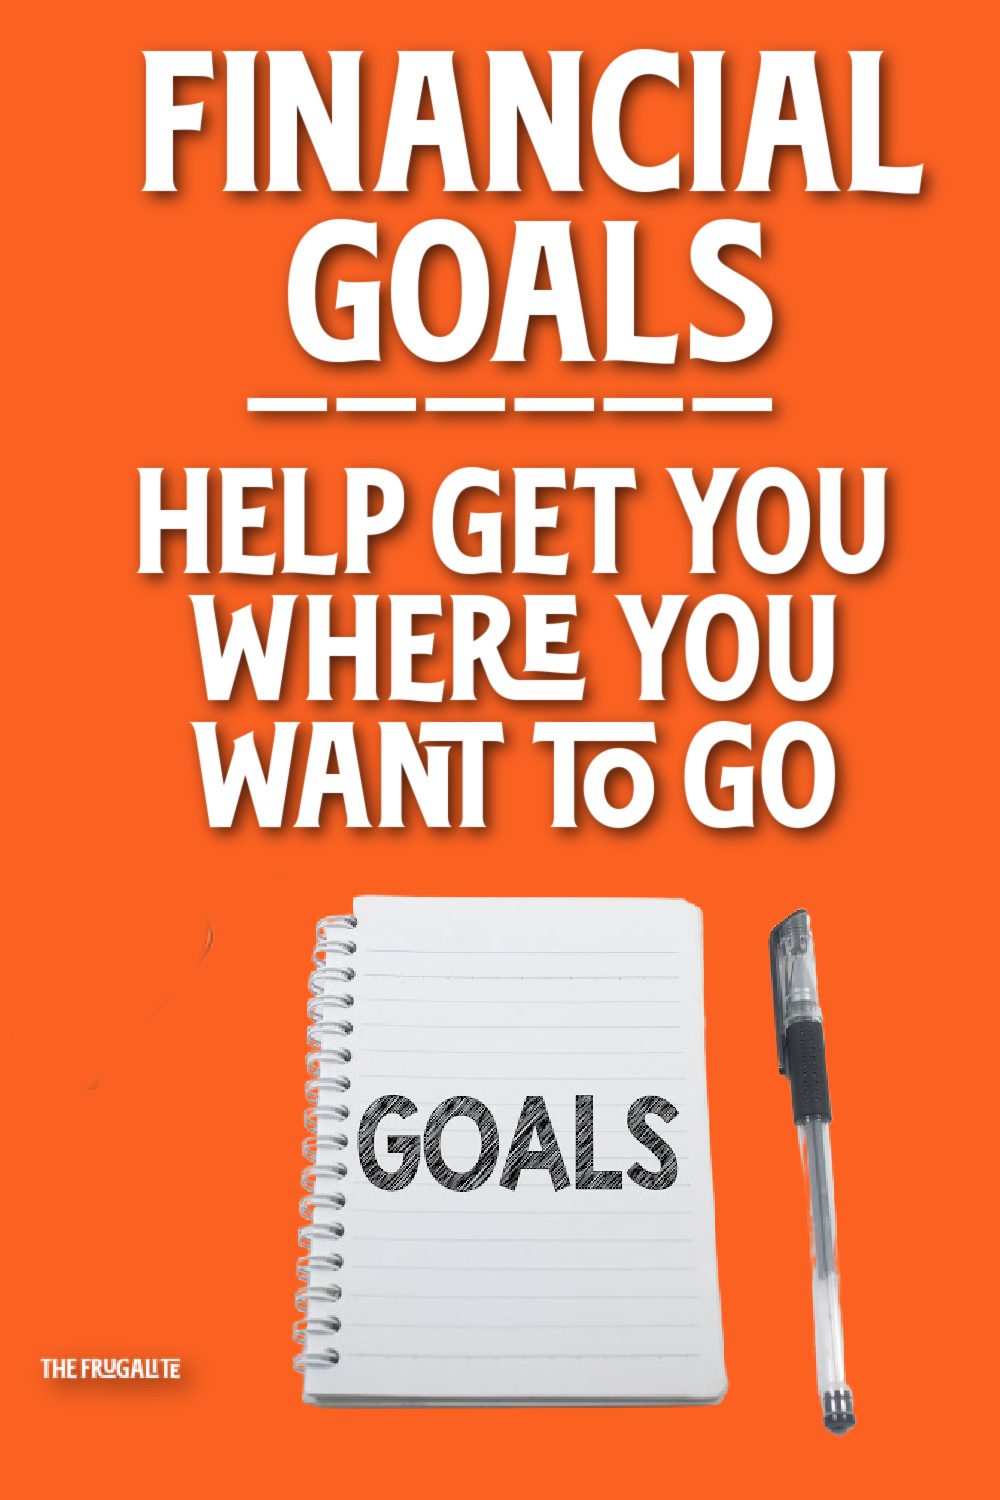 Financial Goals Help Get You Where You Want to Go